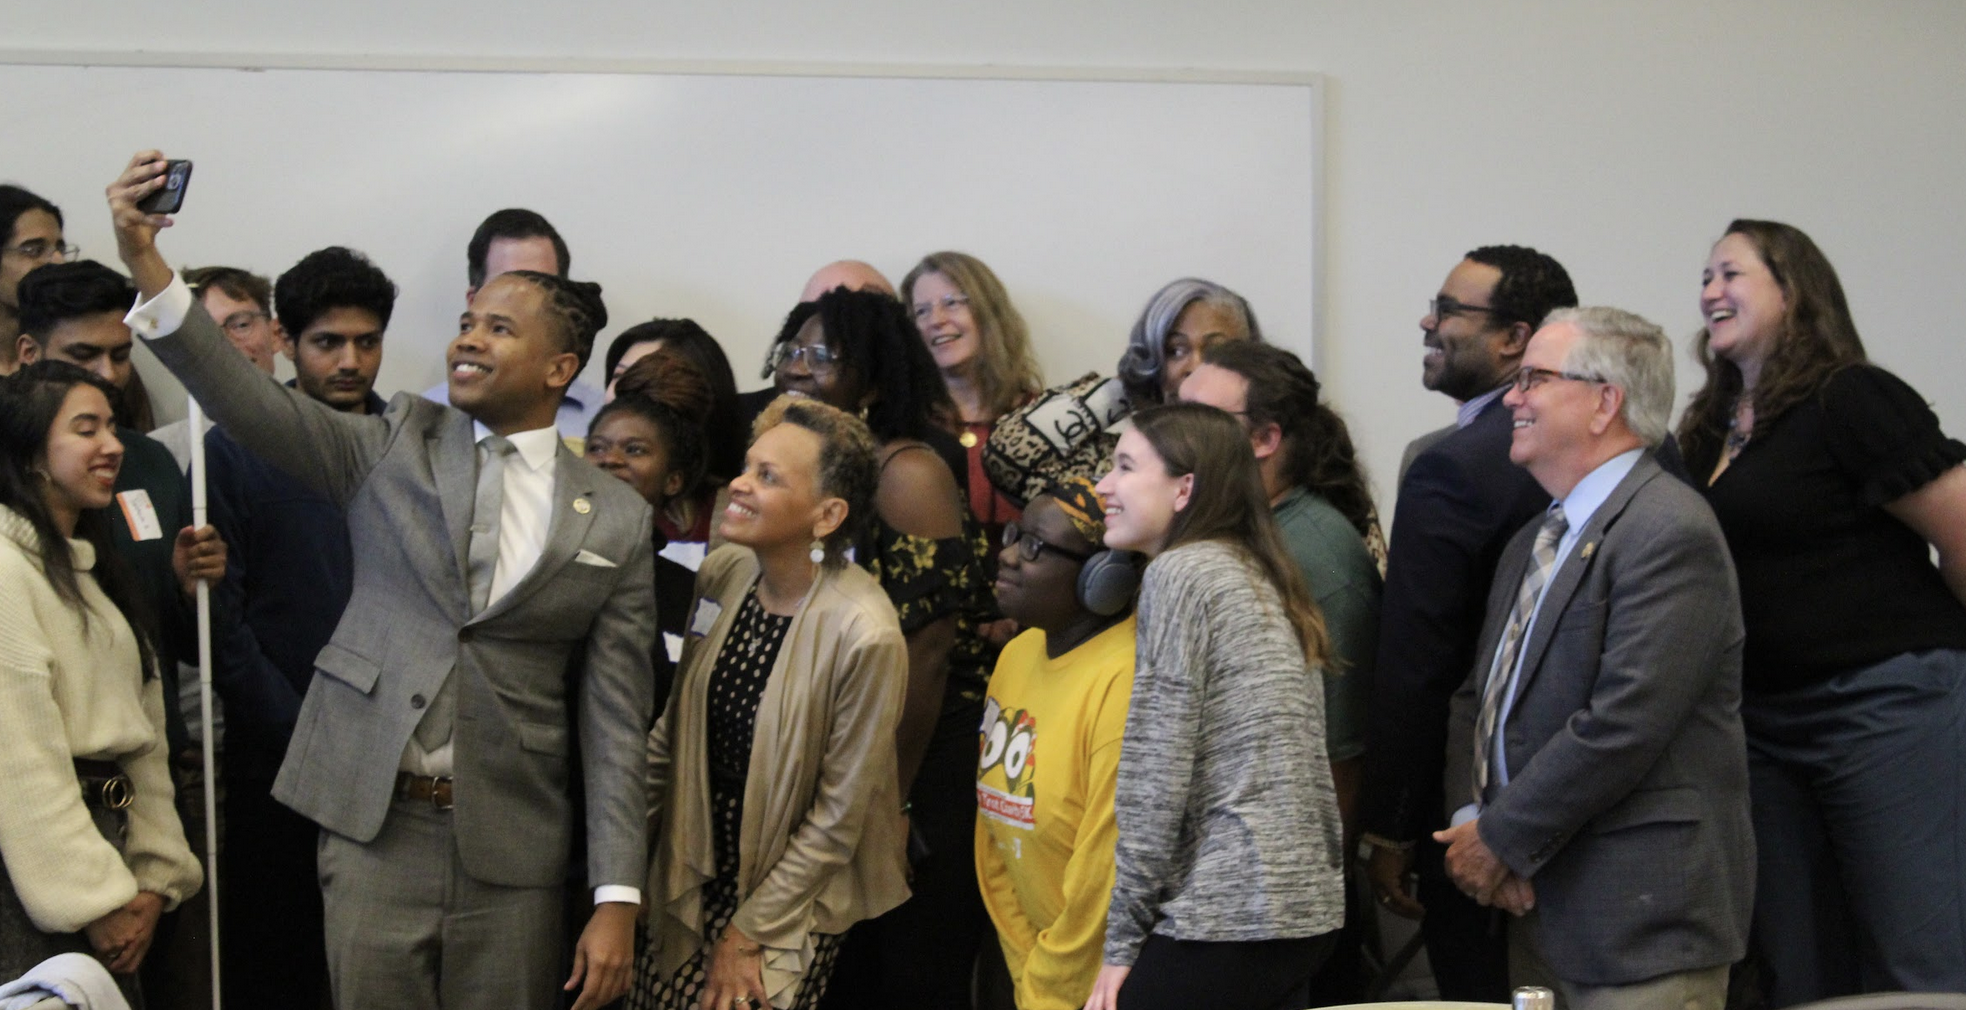 Delegate Acevero takes a selfie with UMBC community members and other state legislators and policy actors